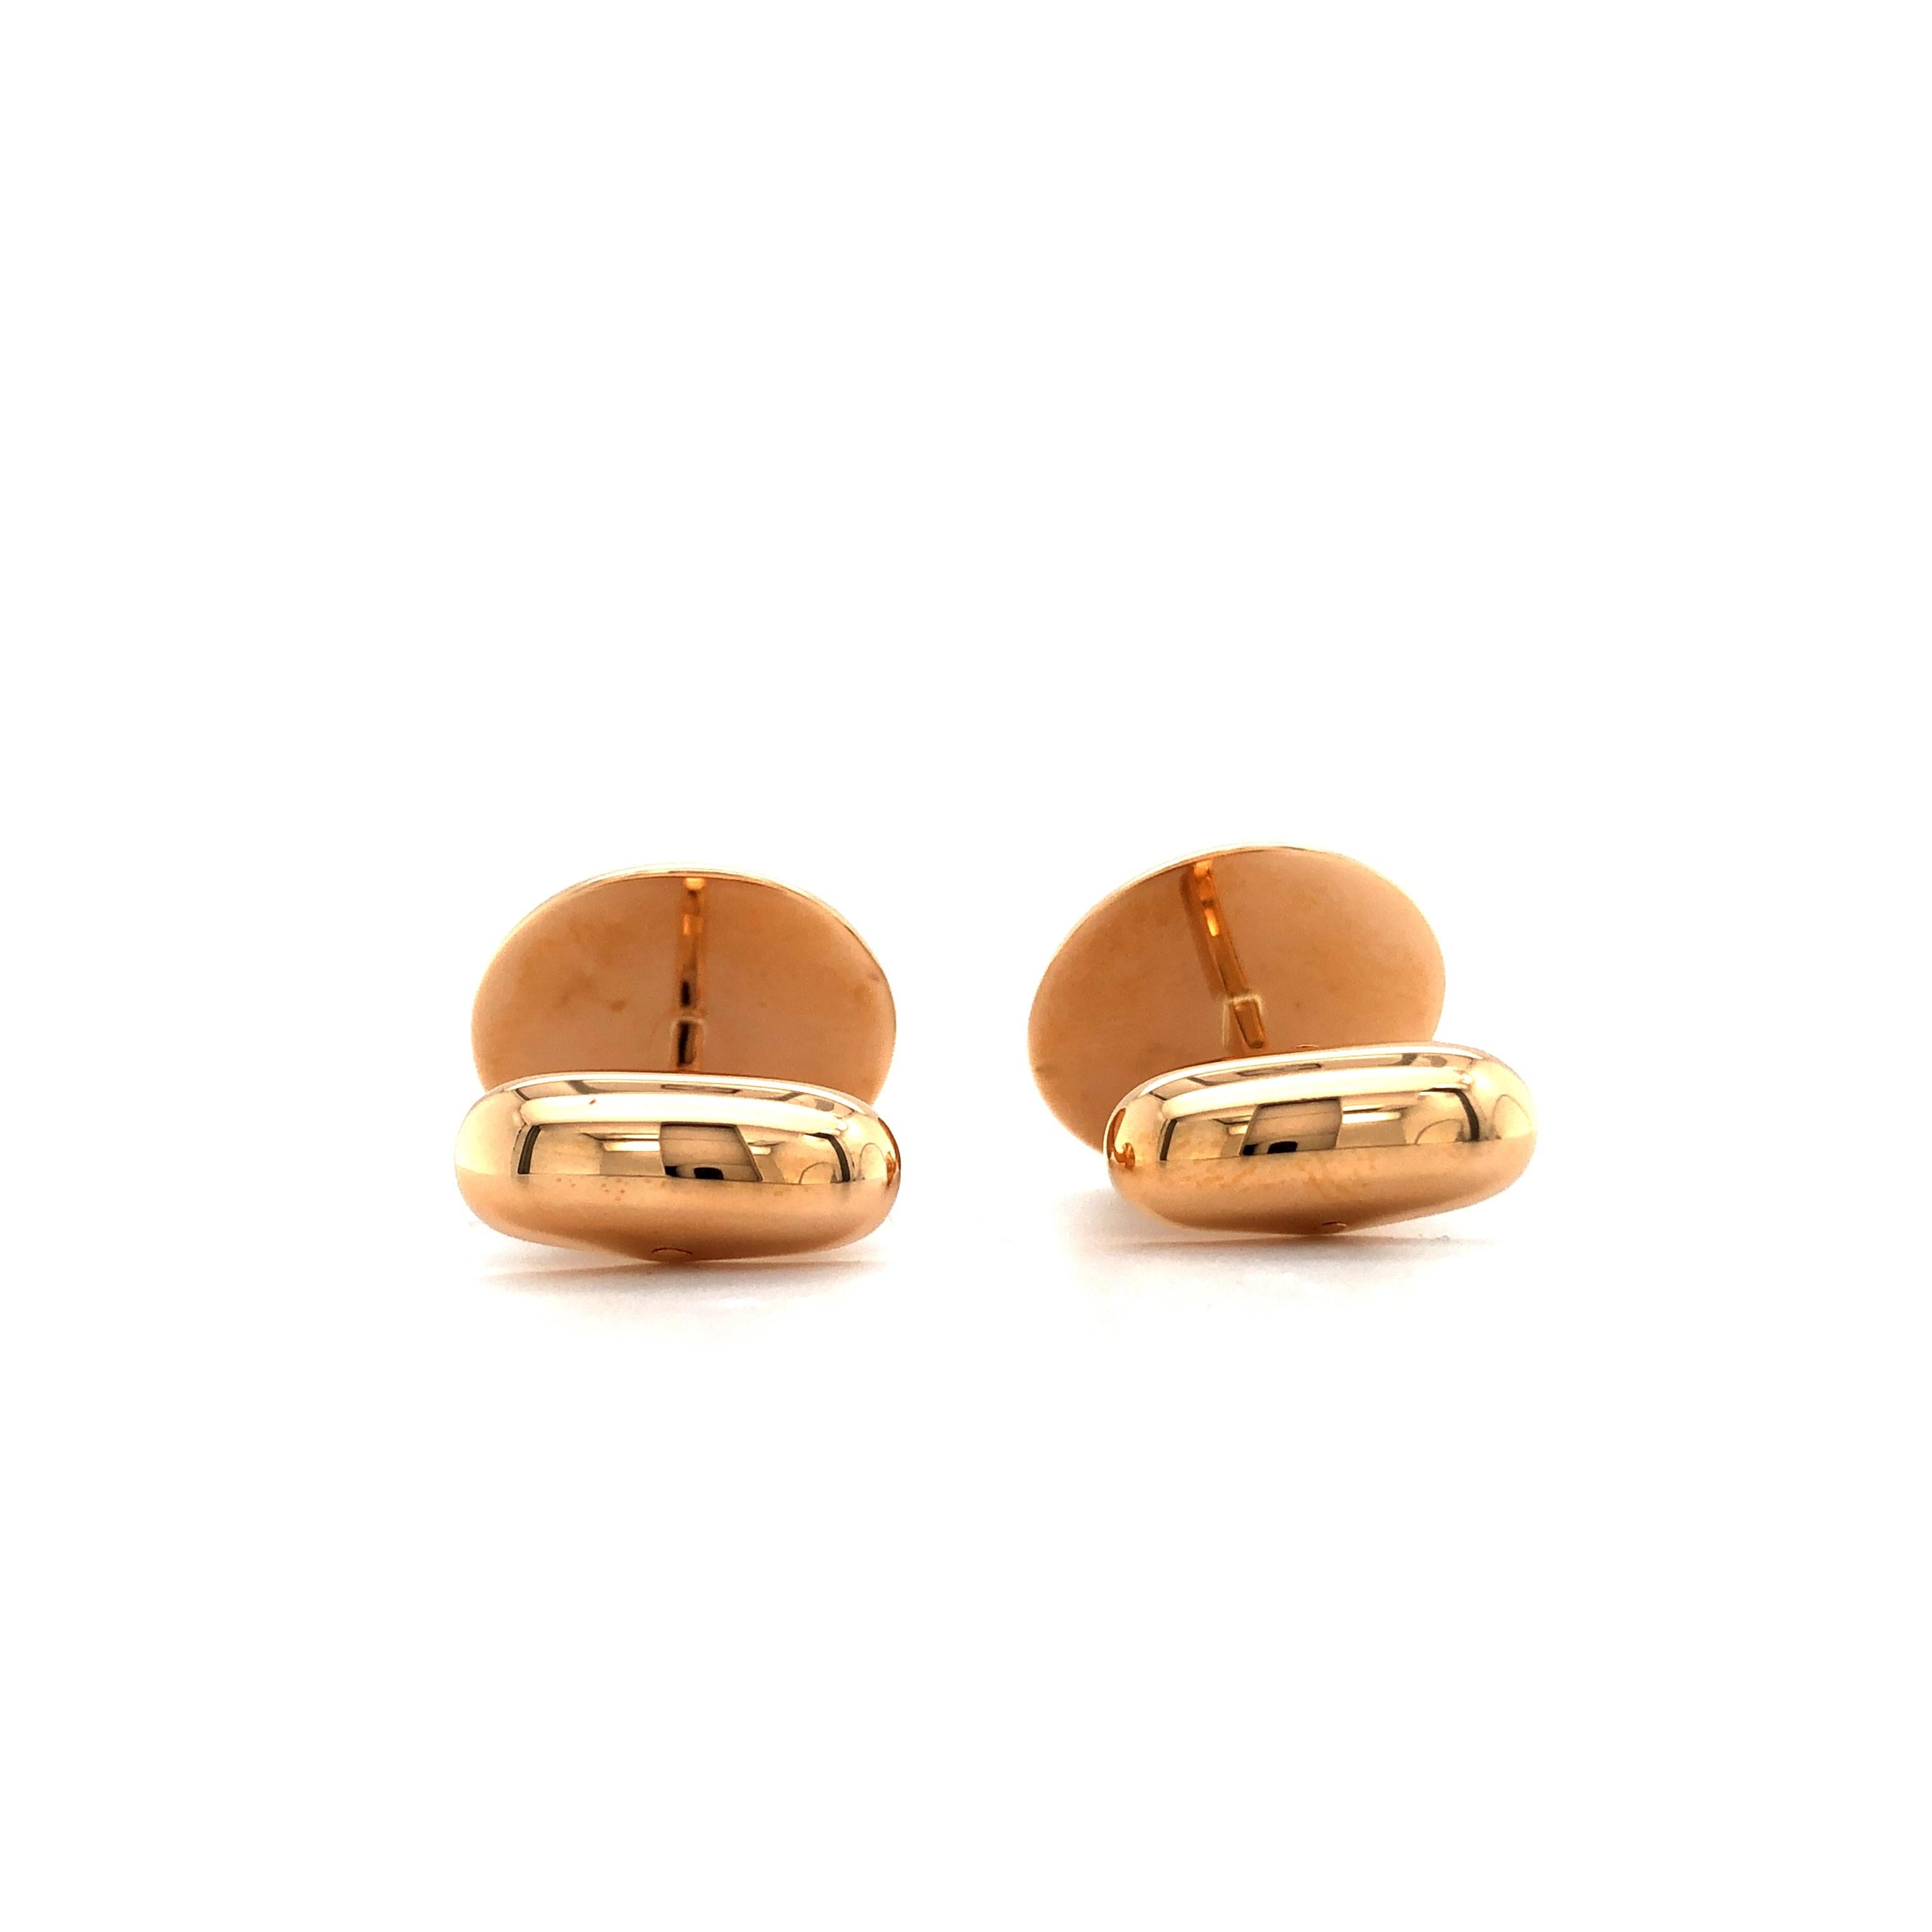 Round Domed Cufflinks - 18k Rose Gold - Highly Polished - Diameter 17.6 mm In New Condition For Sale In Pforzheim, DE